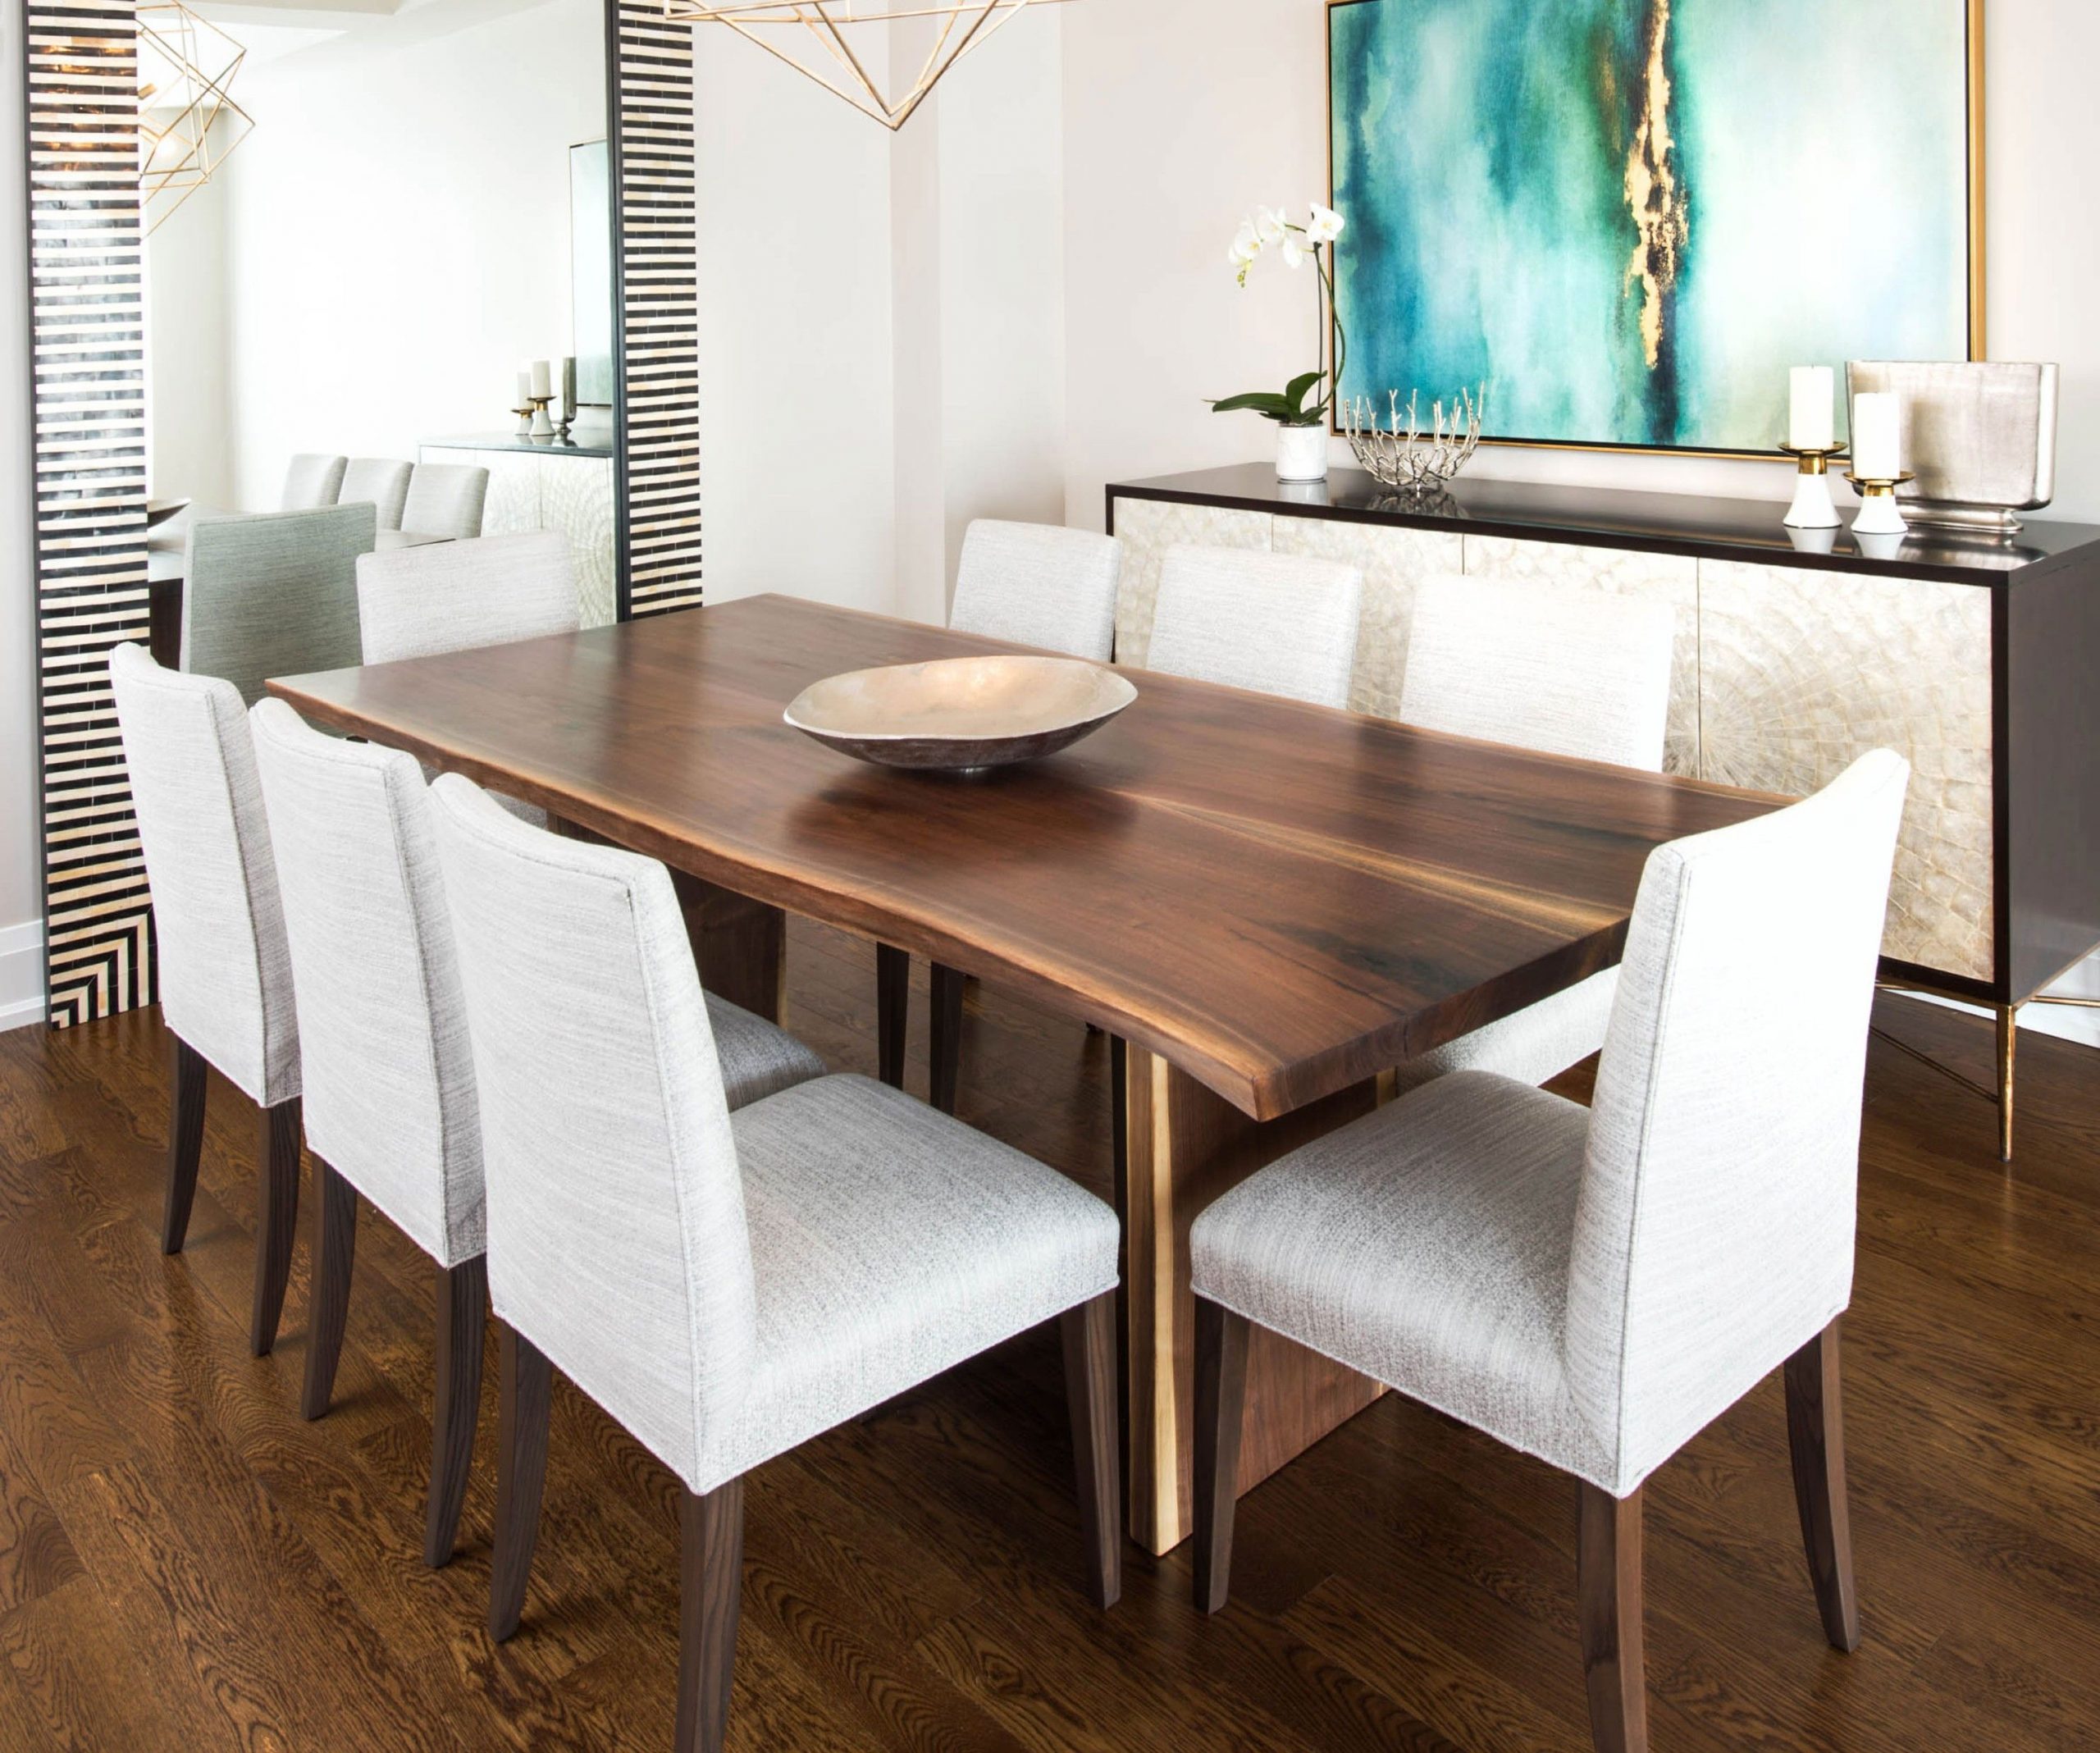 Live Edge Dining Room Tables Toronto Farmhouse Dining Room inside sizing 2970 X 2479